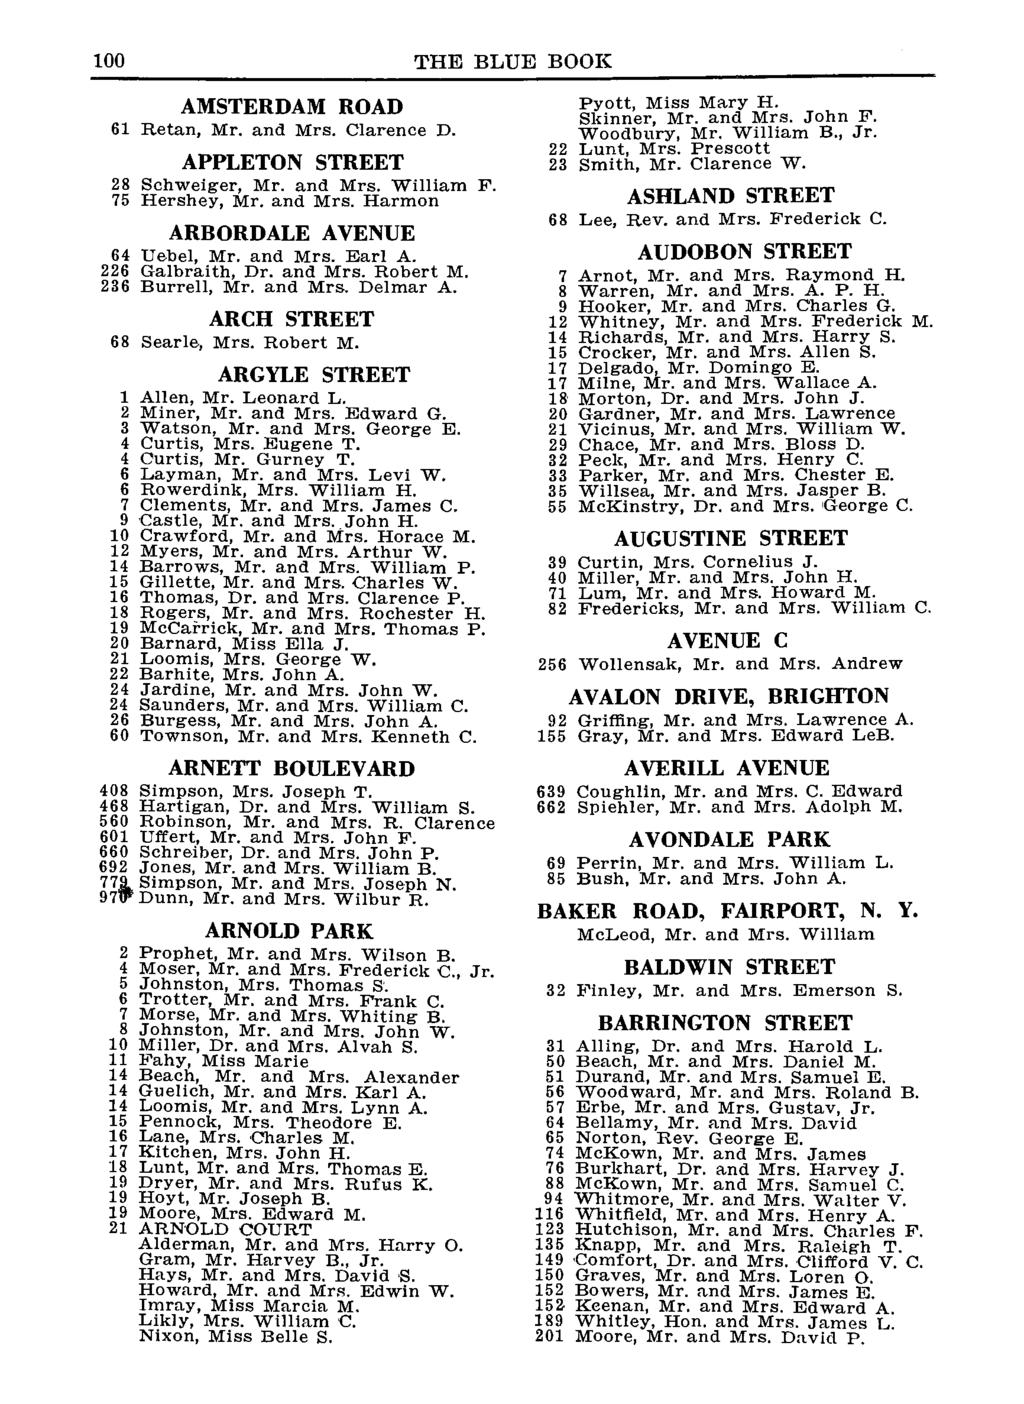 100 THE BLUE BOOK AMSTERDAM ROAD 61 Retan, Mr. and Mrs. Clarence D. APPLETON STREET 28 Schweiger, Mr. and Mrs. William F. 75 Hershey, Mr. and Mrs. Harmon ARBORDALE AVENUE 64 Uebel, Mr. and Mrs. Earl A.